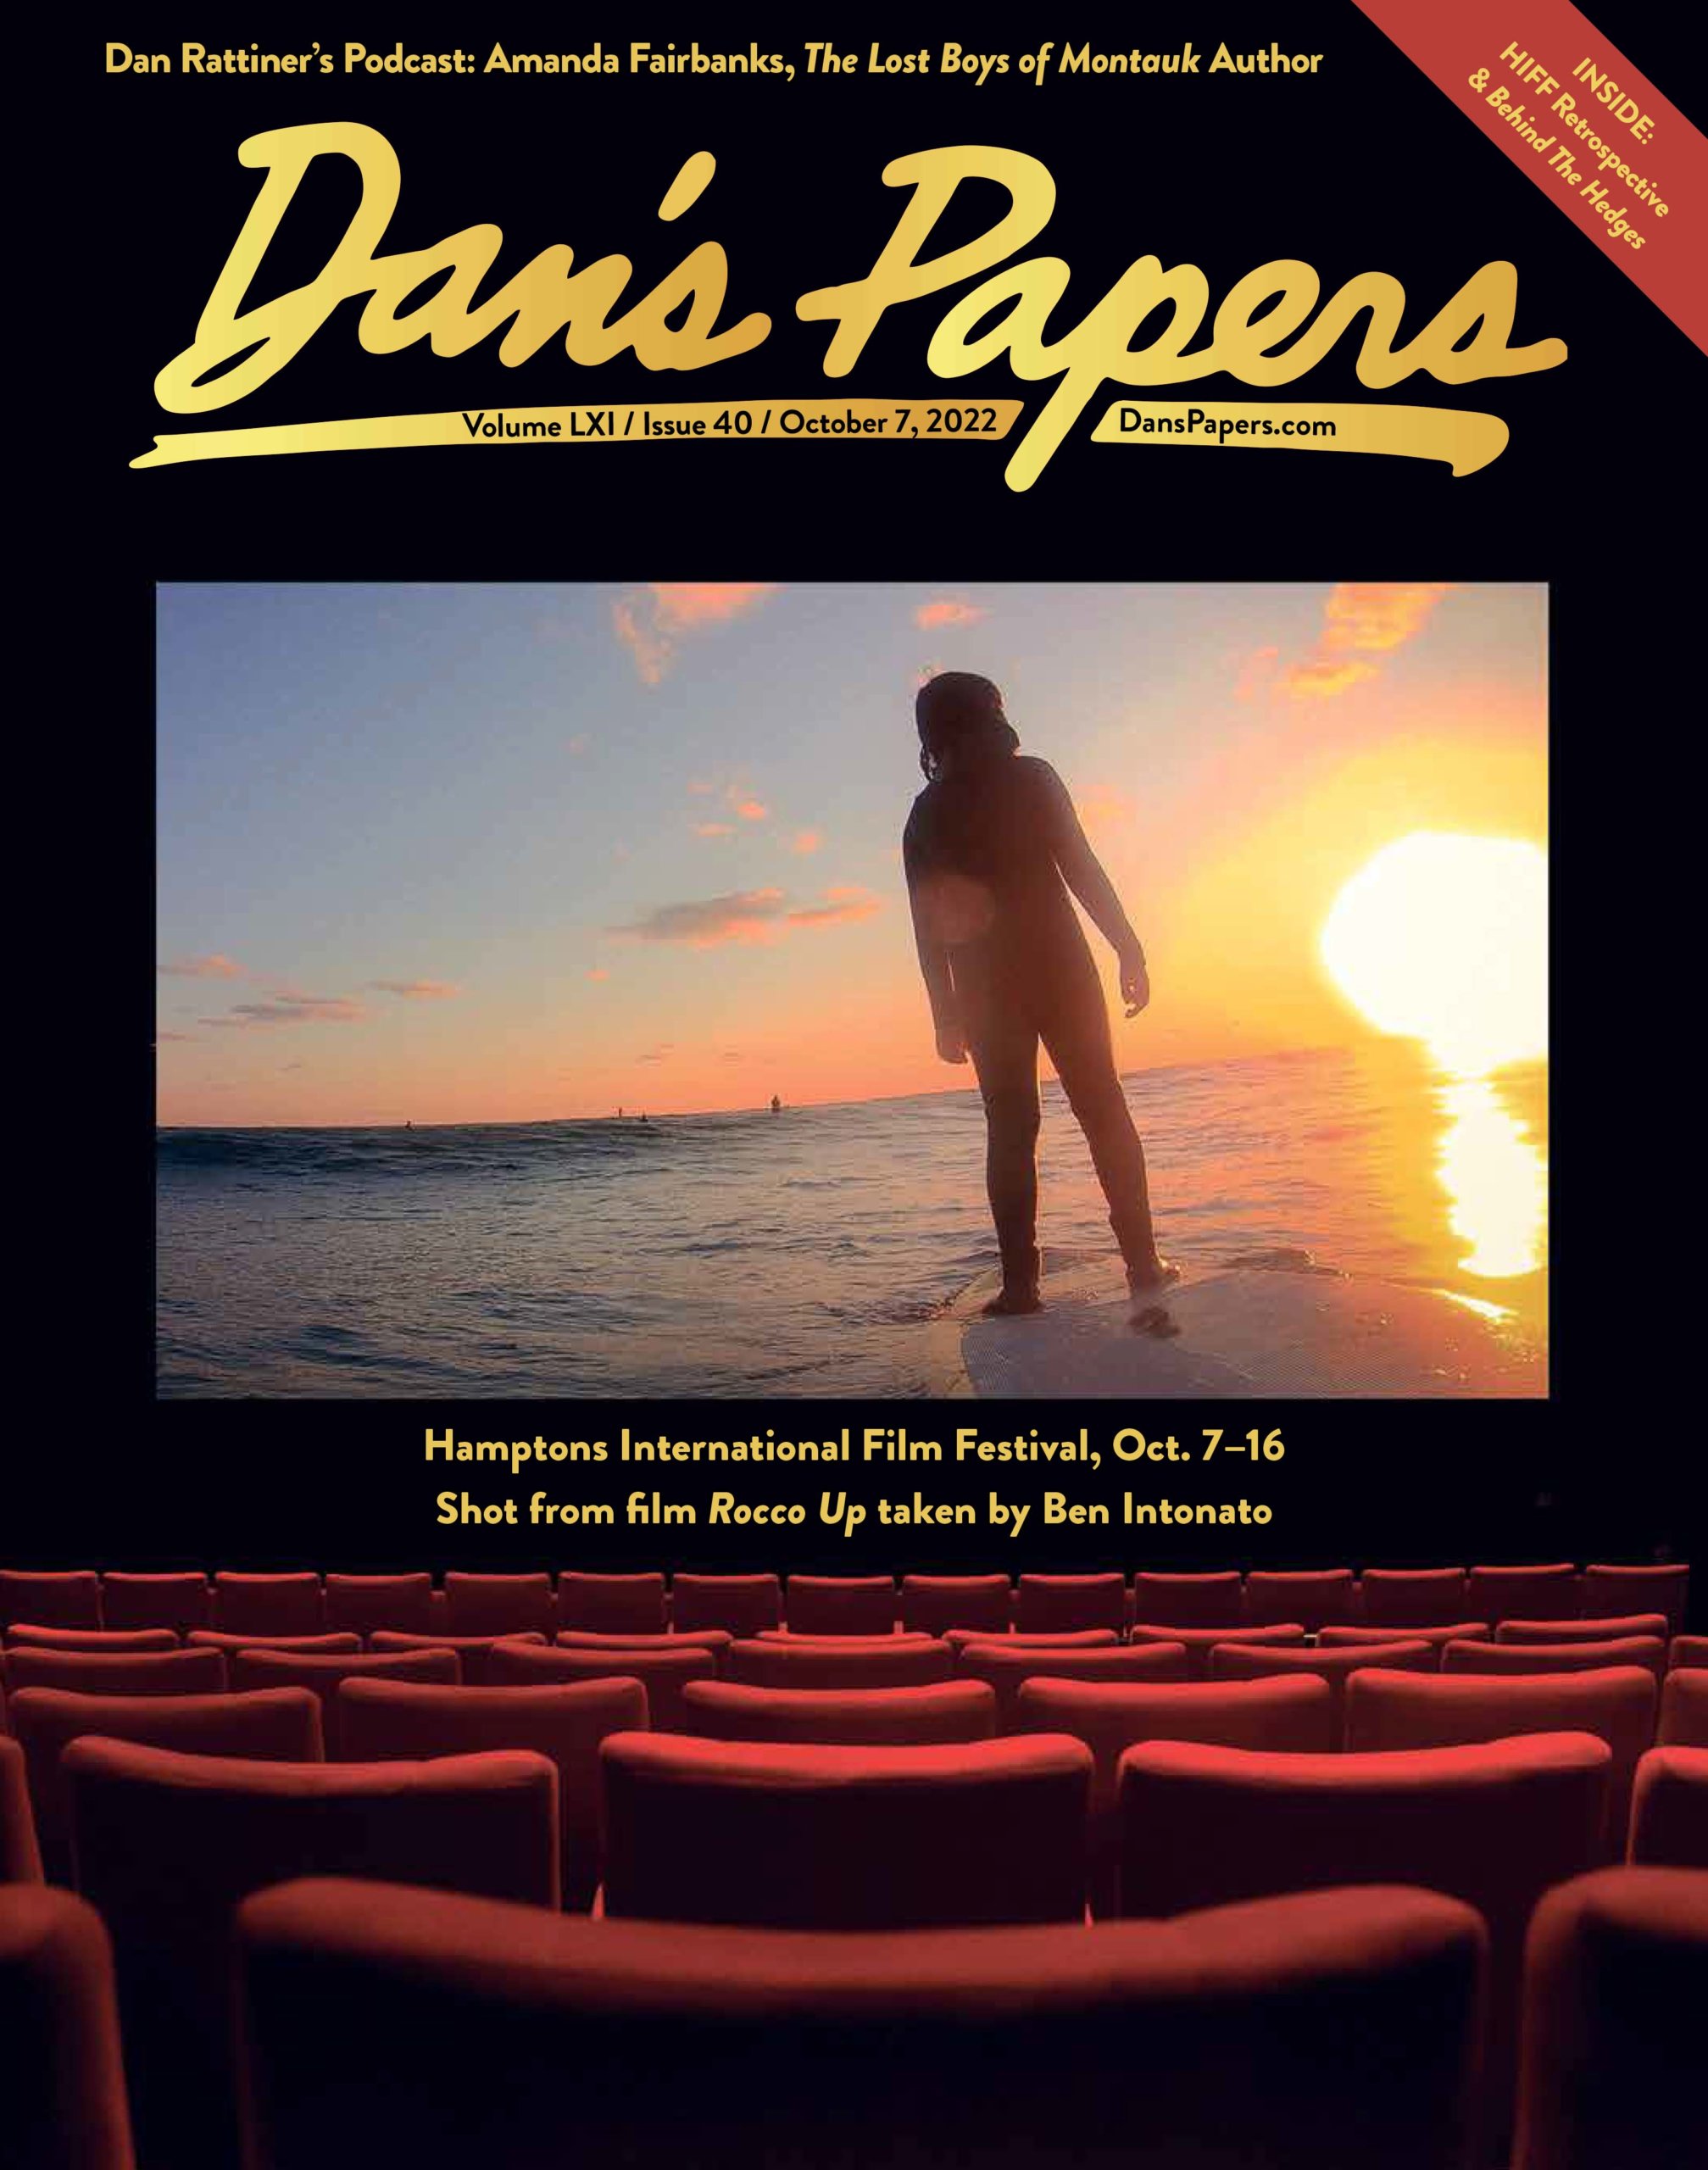 October 7, 2022 Dan's Papers HIFF cover art featuring Rocco Up at HIFF